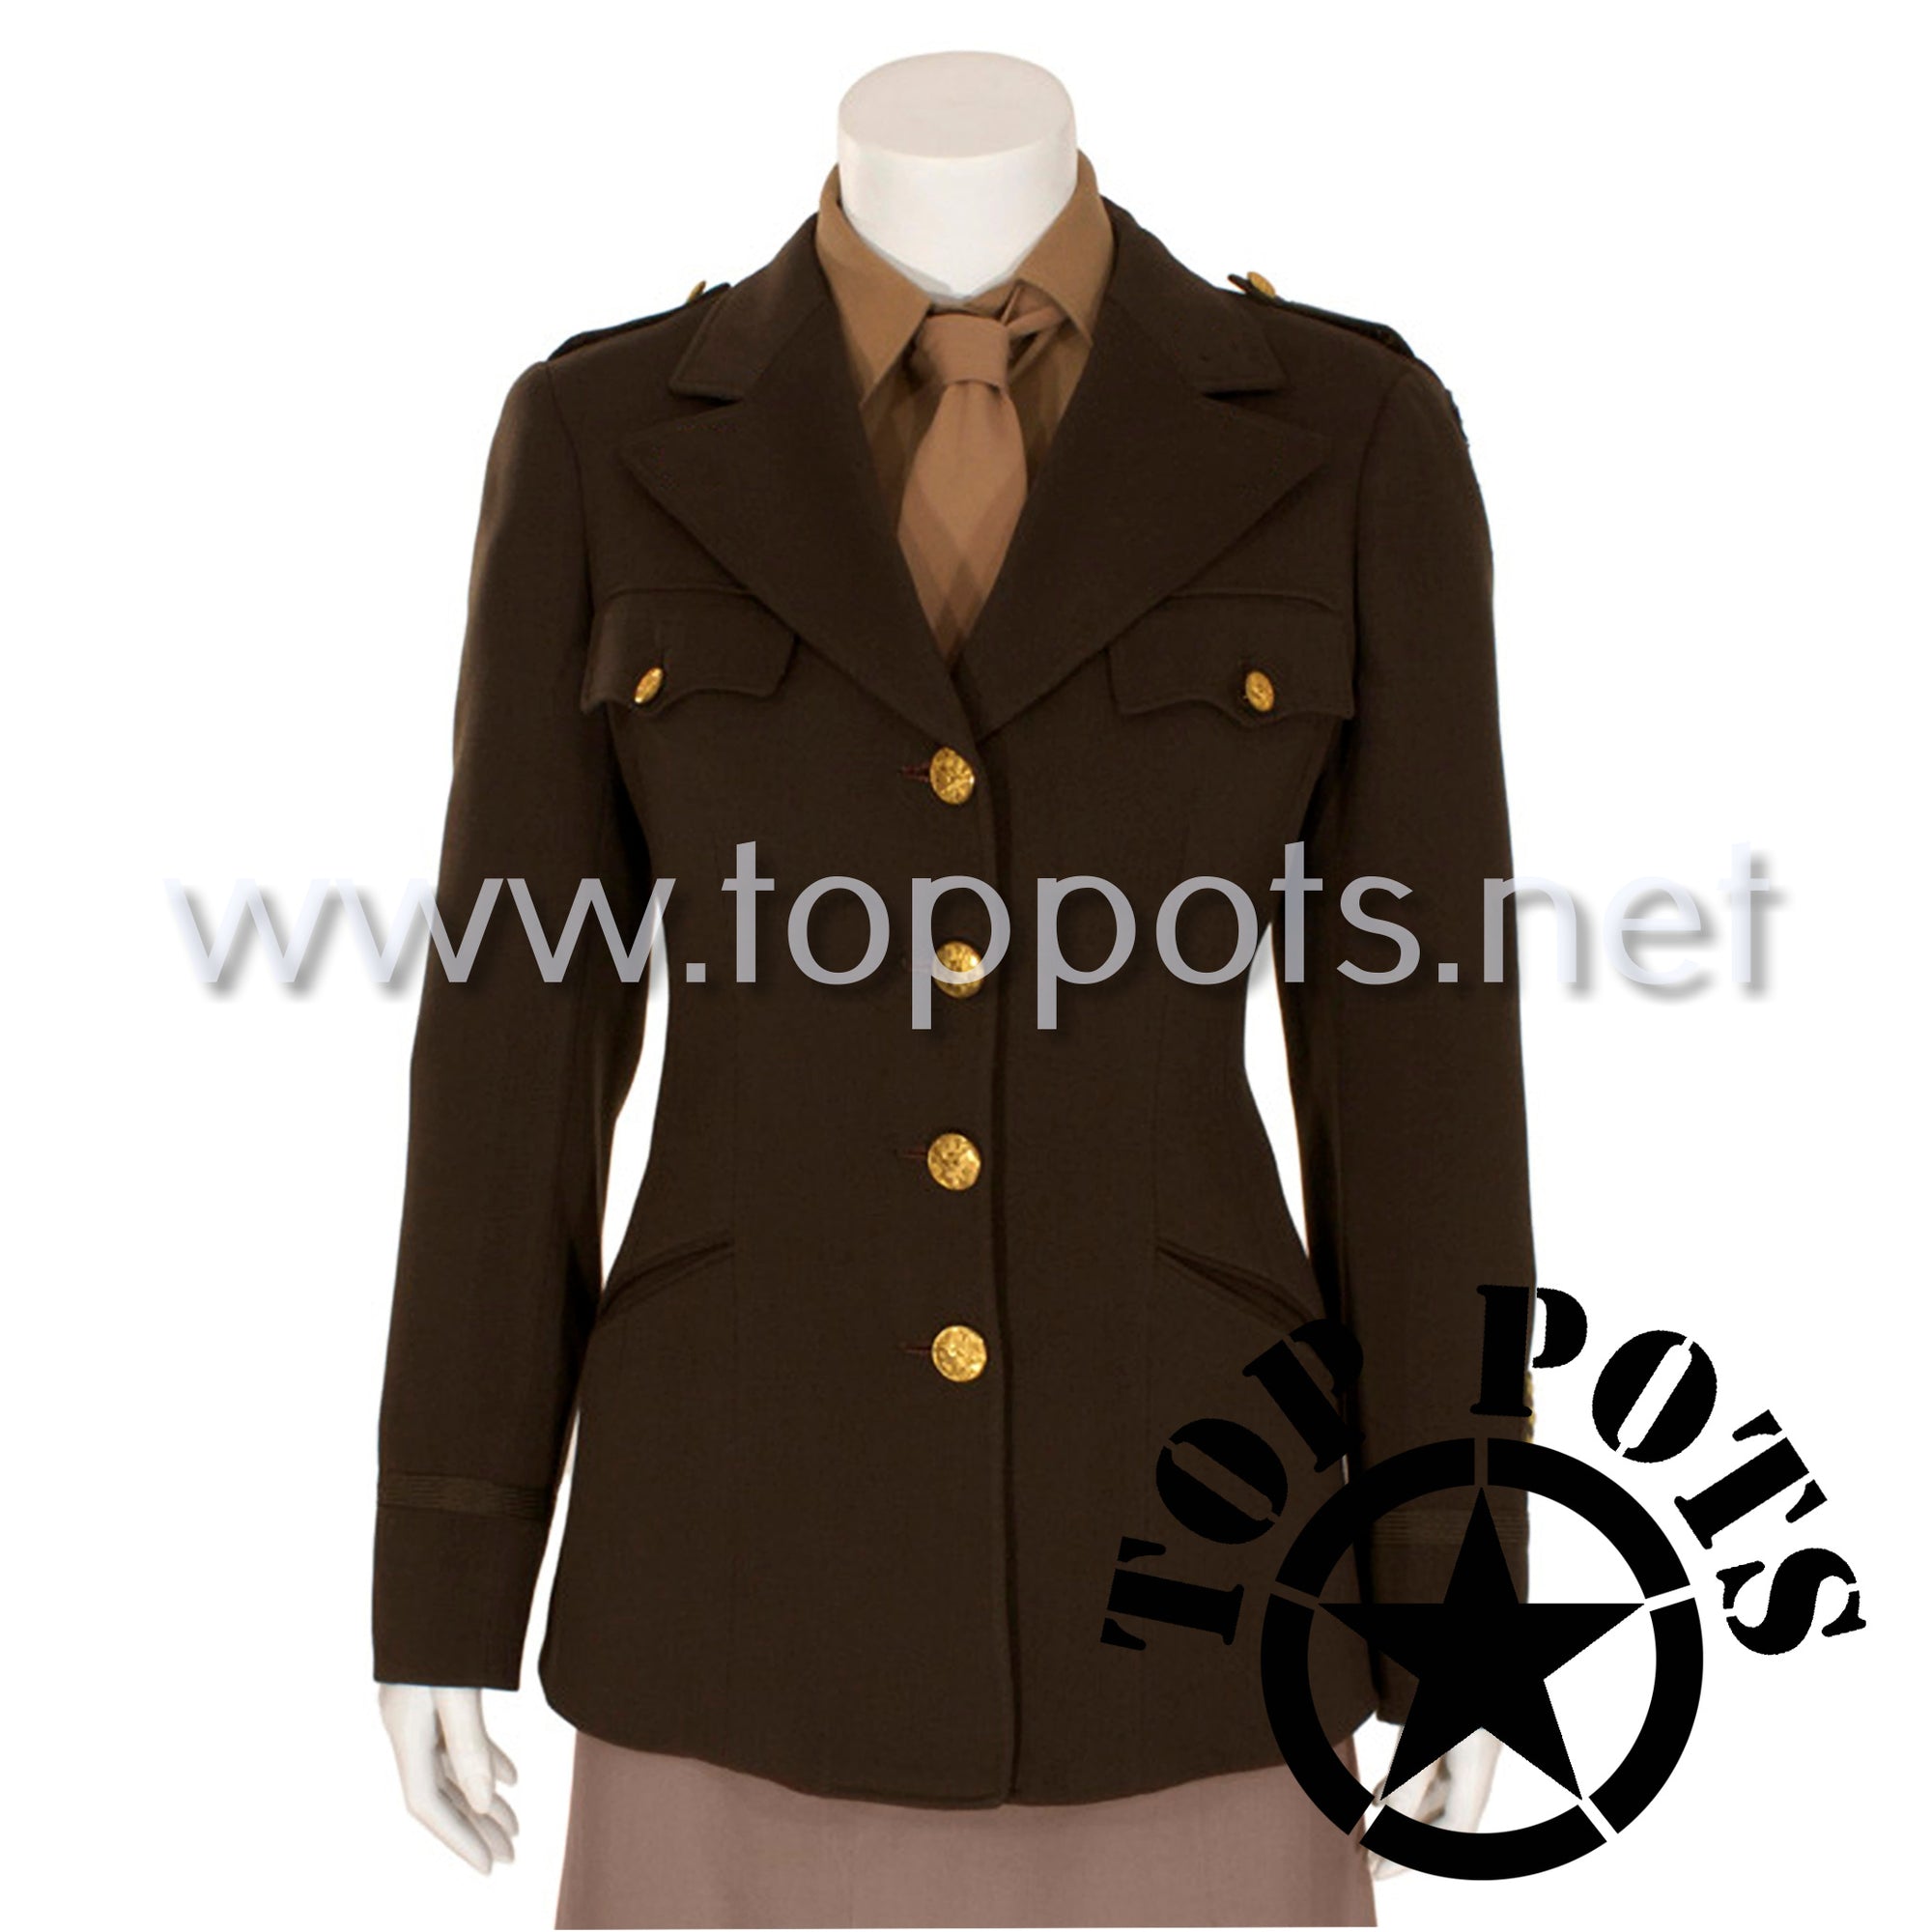 WWII US Army Reproduction Chocolate Wool Elastique WAC Officer Uniform – Class A Jacket